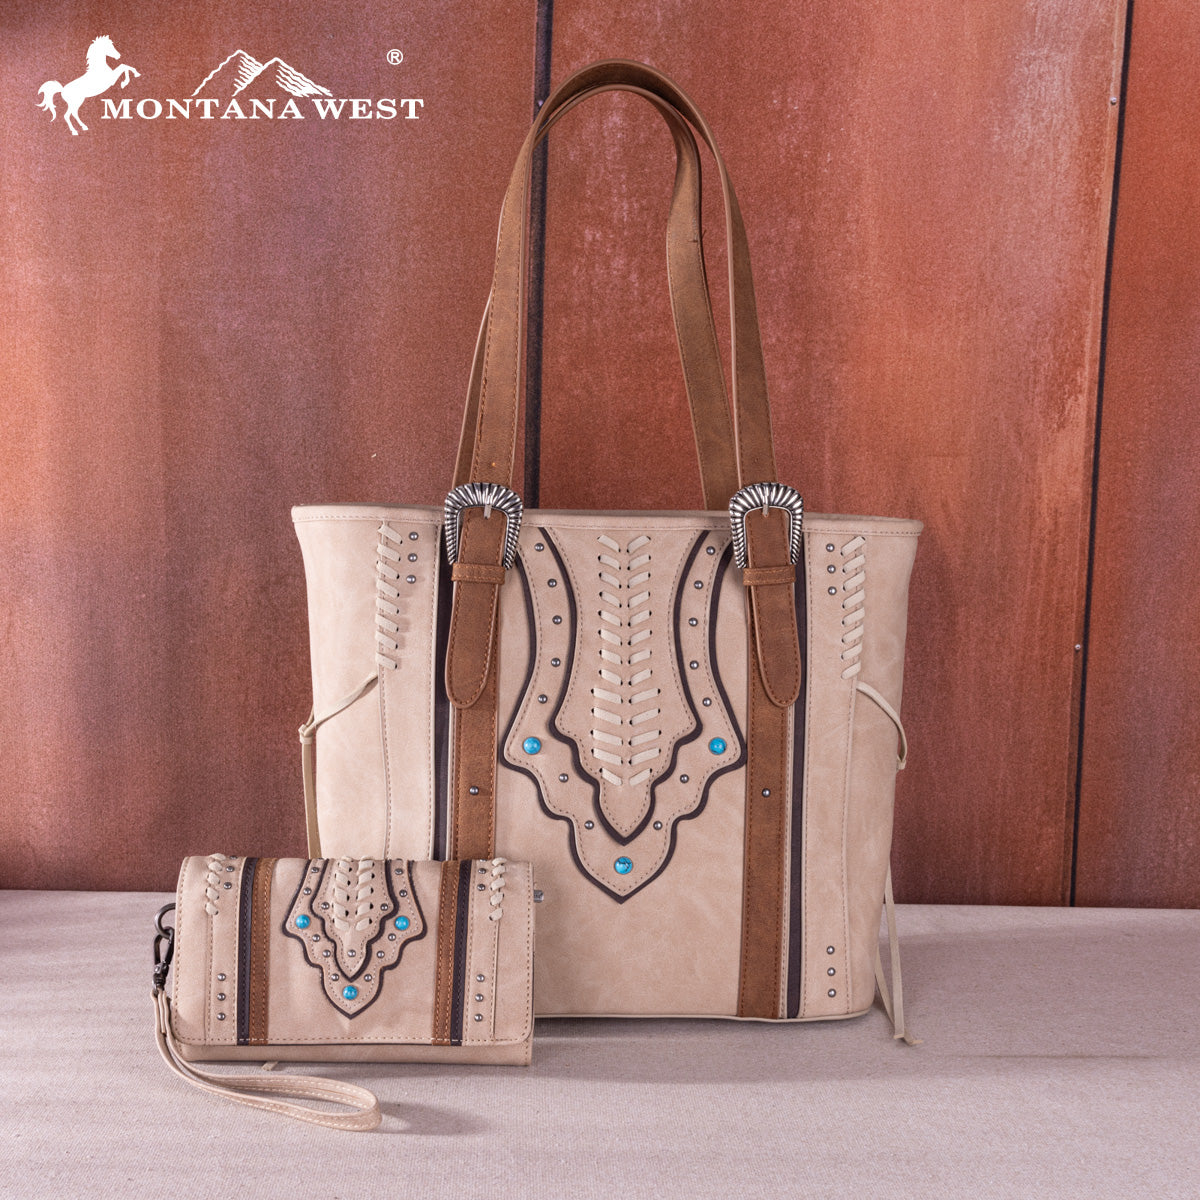 Montana West Whipstitch Concealed Carry Tote Set